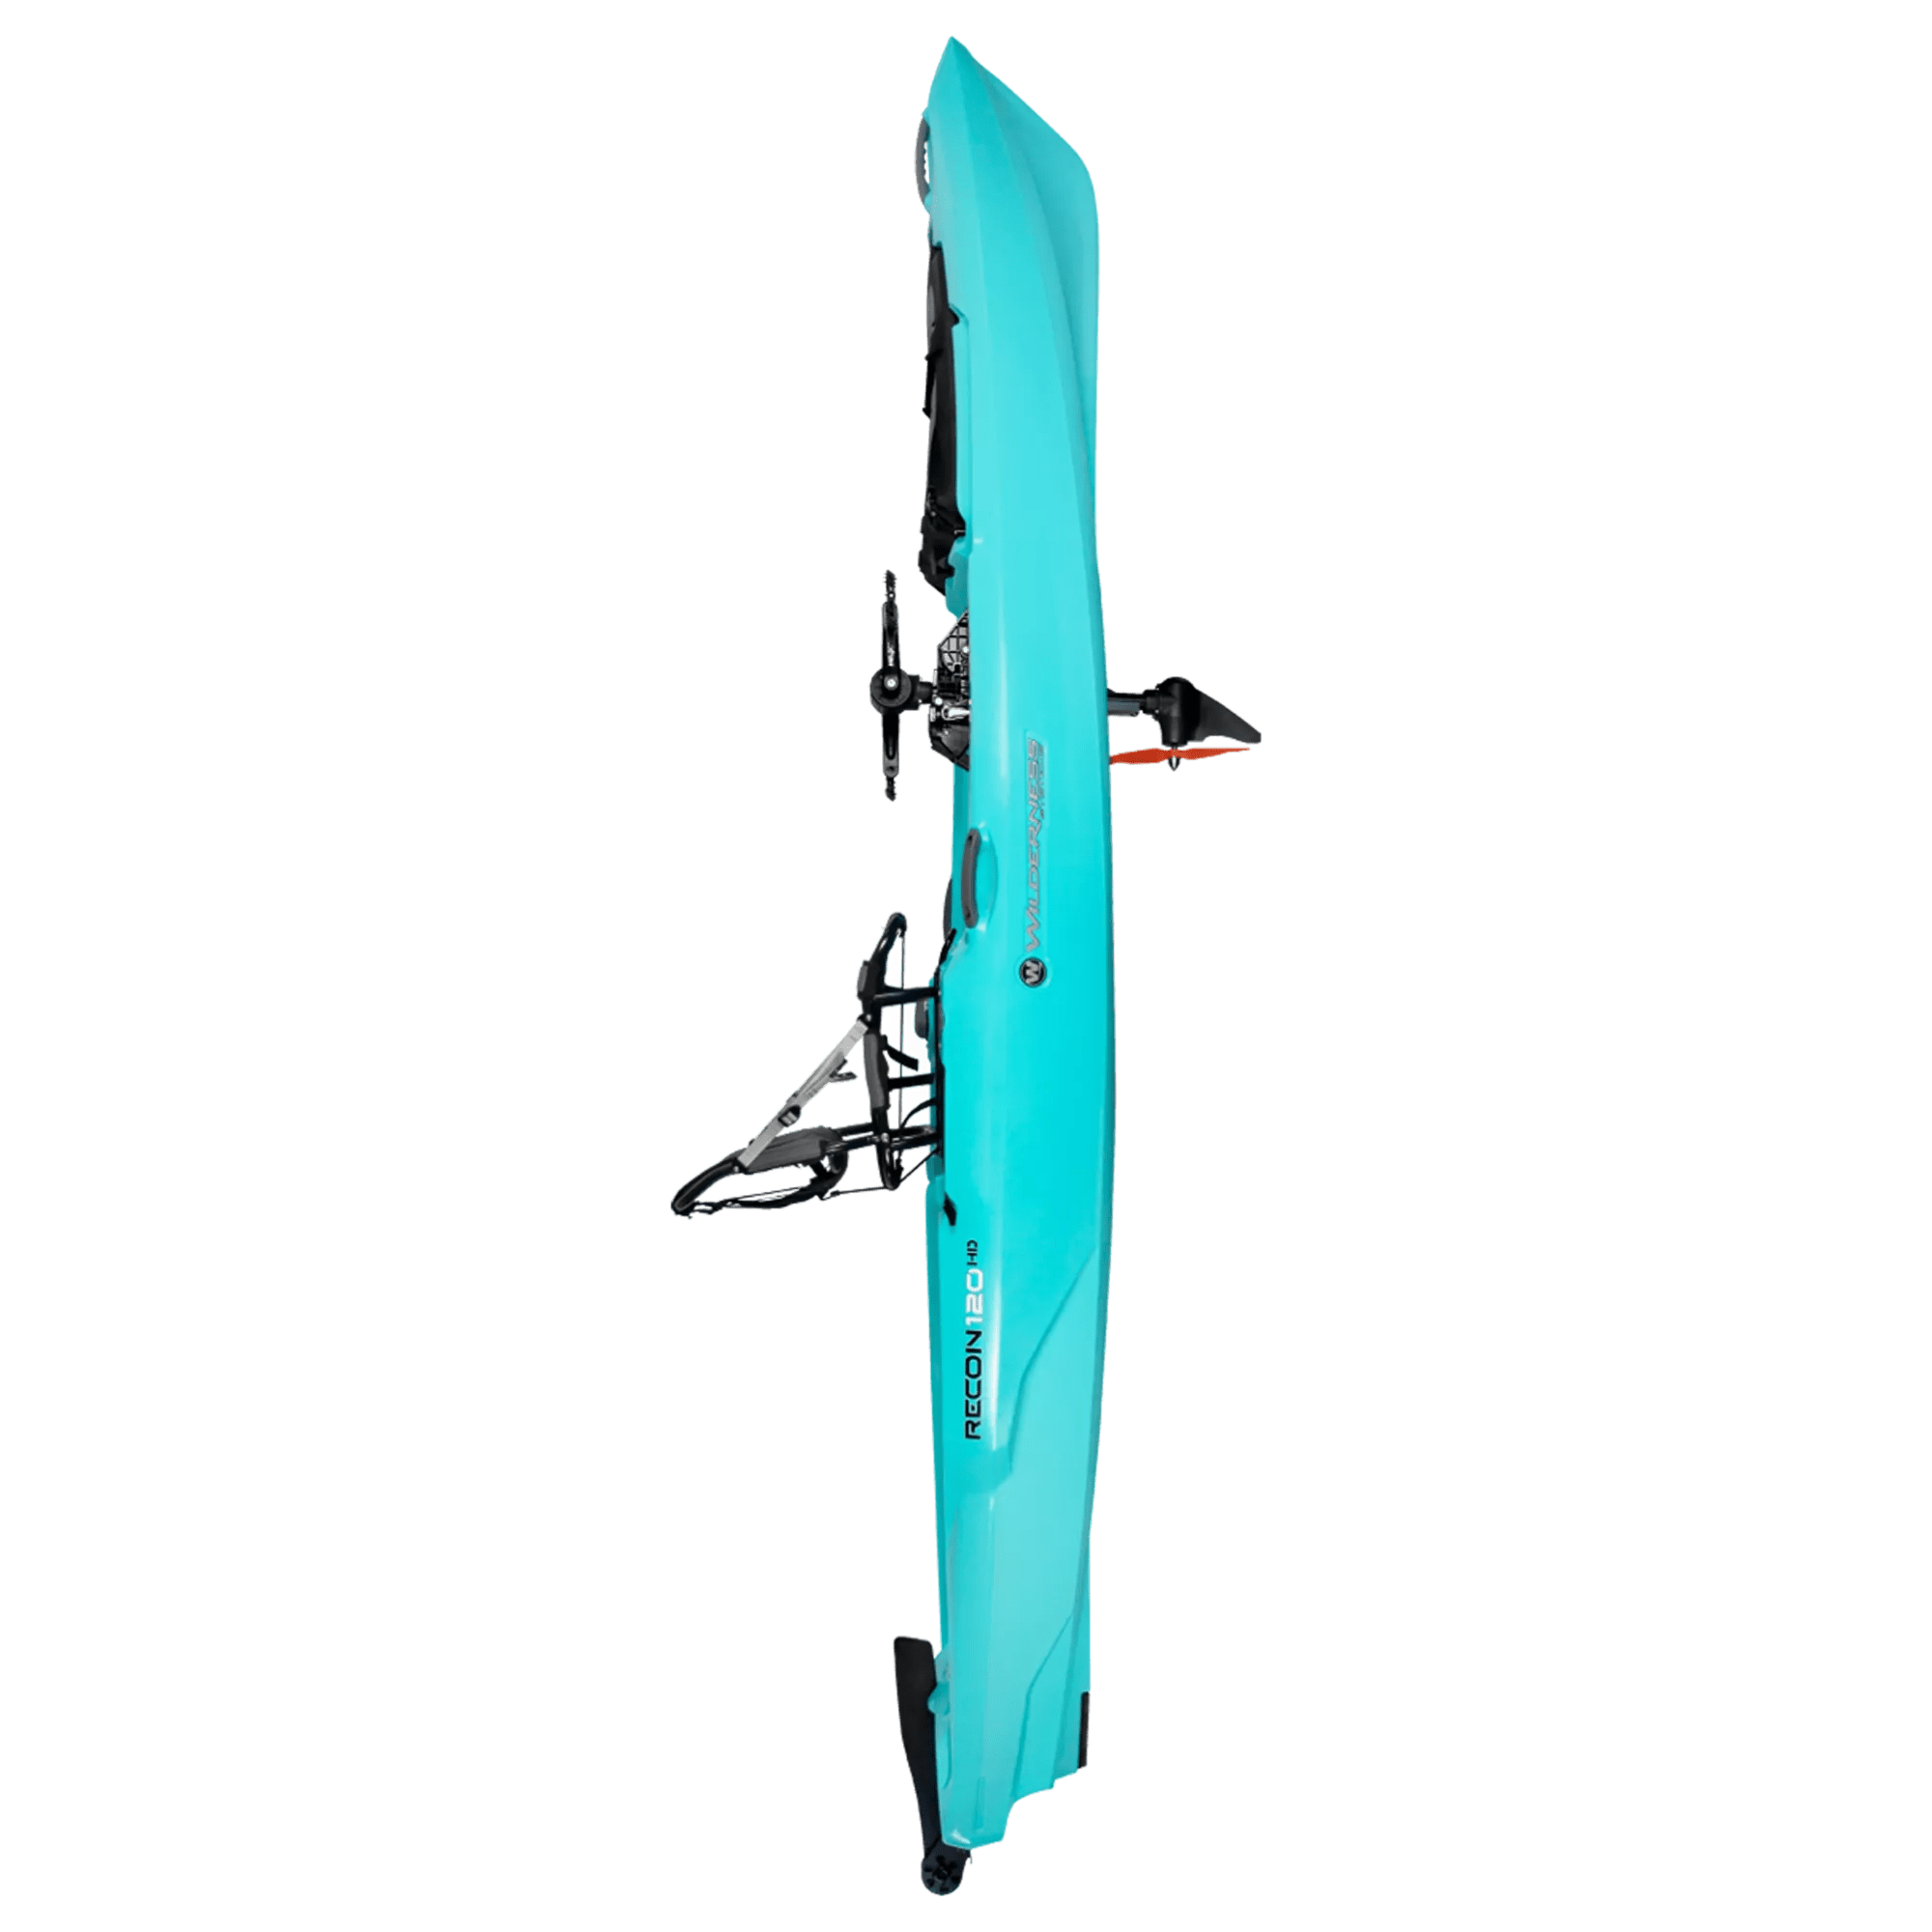 WILDERNESS SYSTEMS - Recon 120 HD Fishing Kayak - Discontinued color/model - Aqua - 9751090192 - SIDE